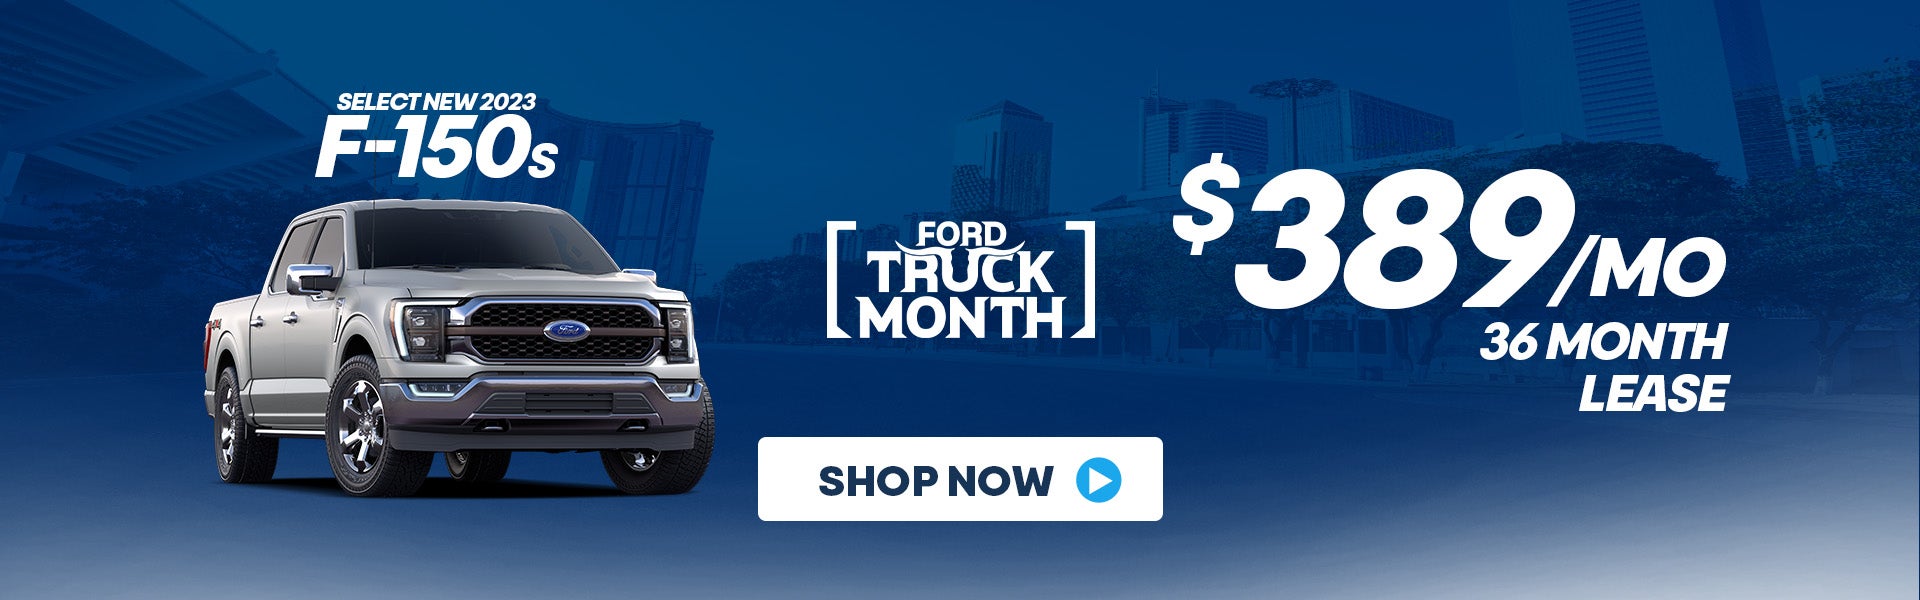 Ford Truck Month Deals Near Me in Boerne, TX